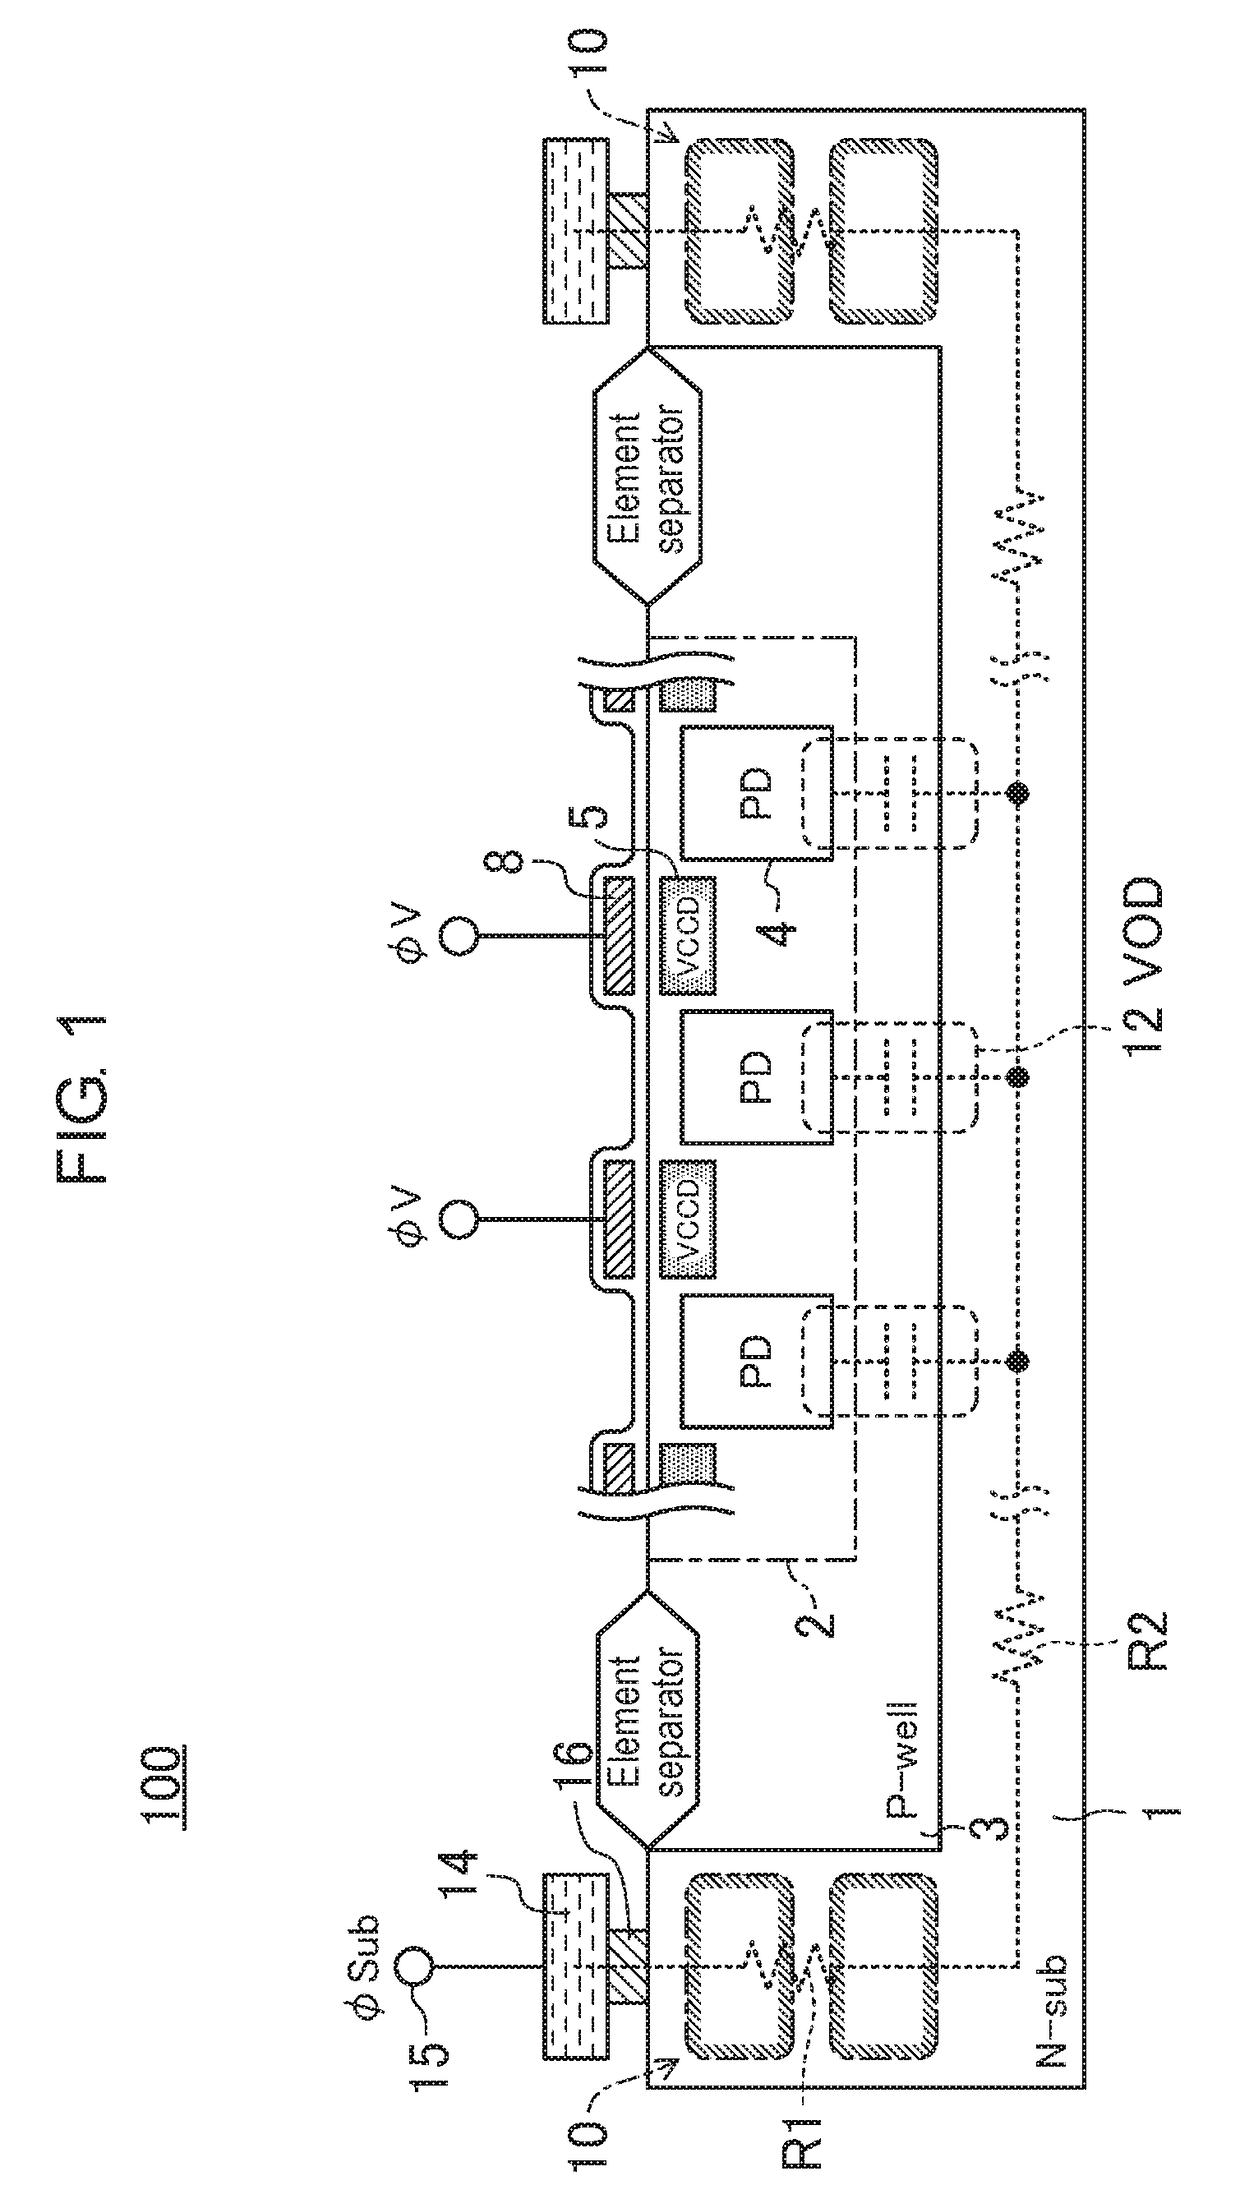 Solid-state image sensor and imaging device using same